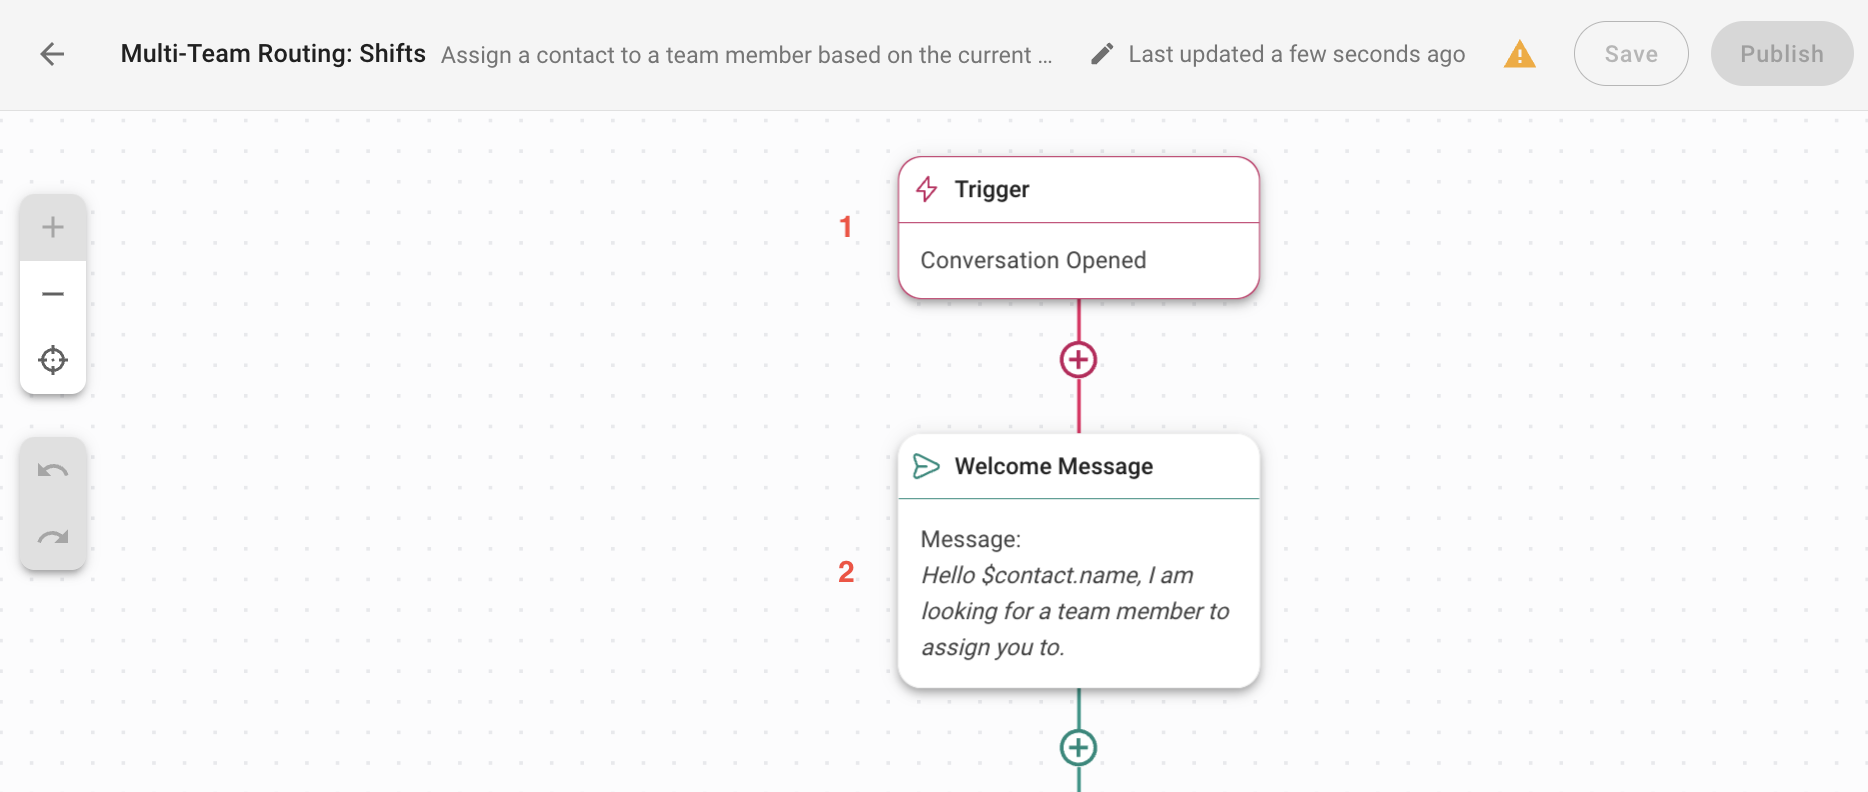 Multi-Team Routing Shift Workflow Template